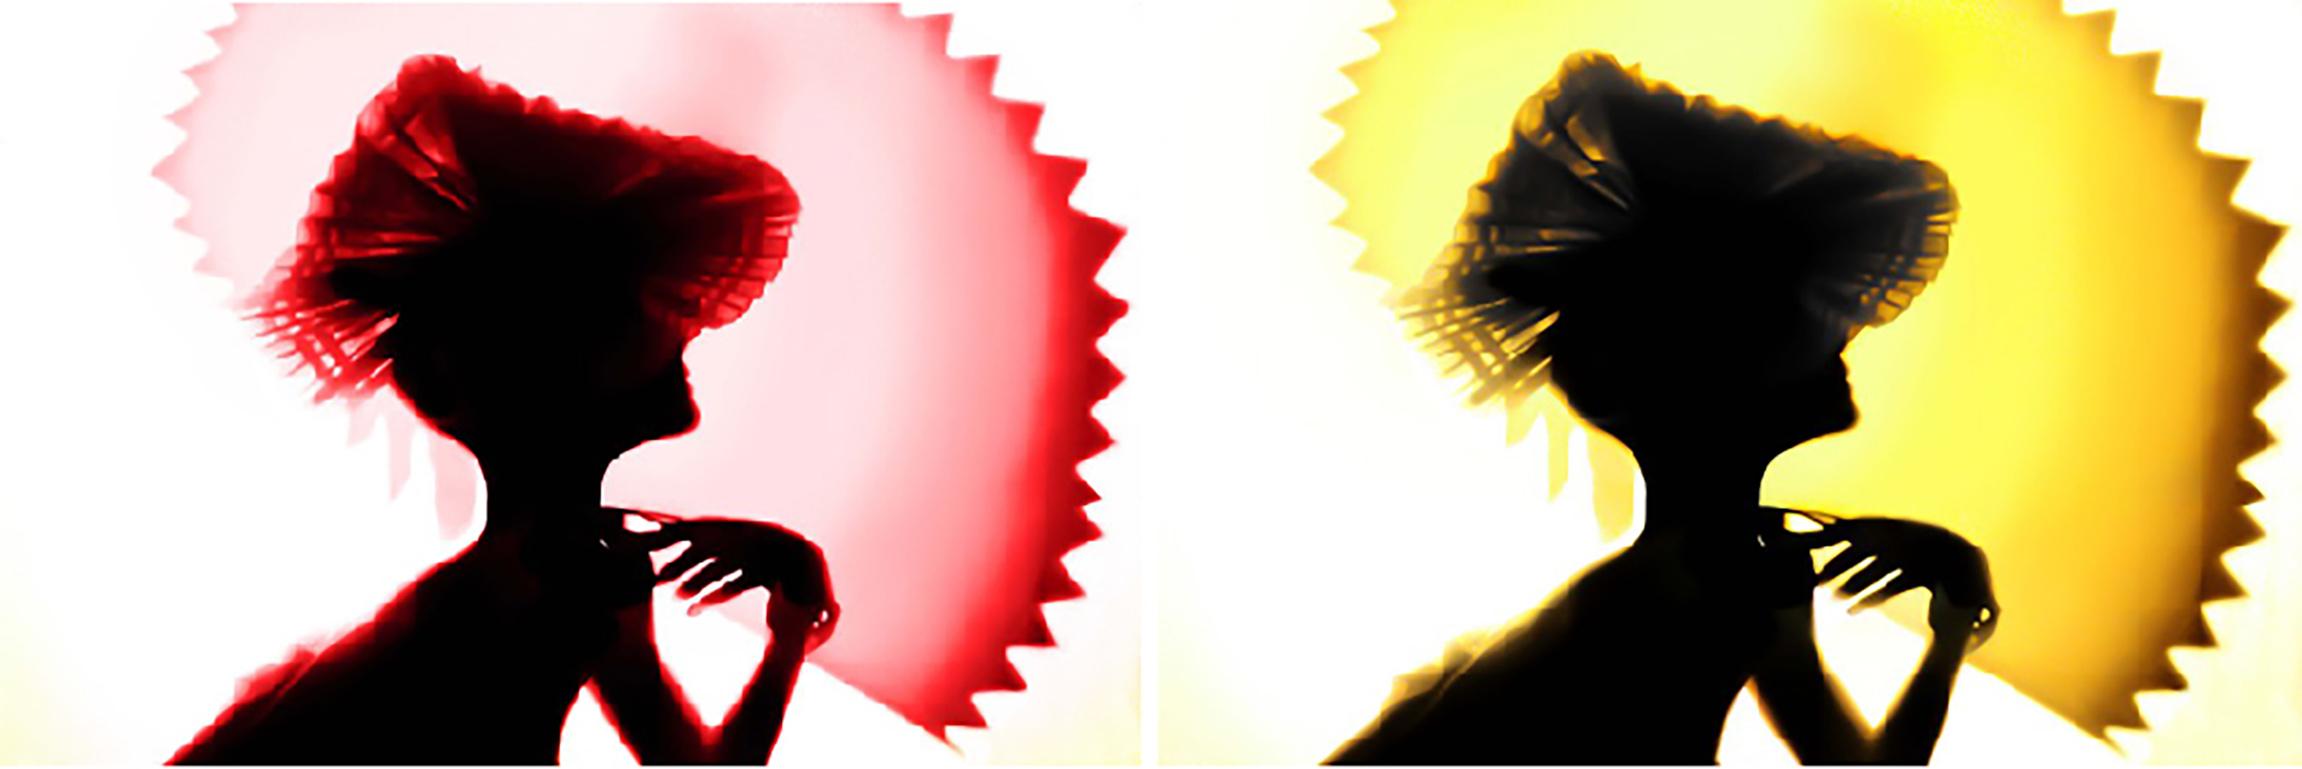 Dora Franco Color Photograph - Back Lighting, Yellow Red Diptych. 